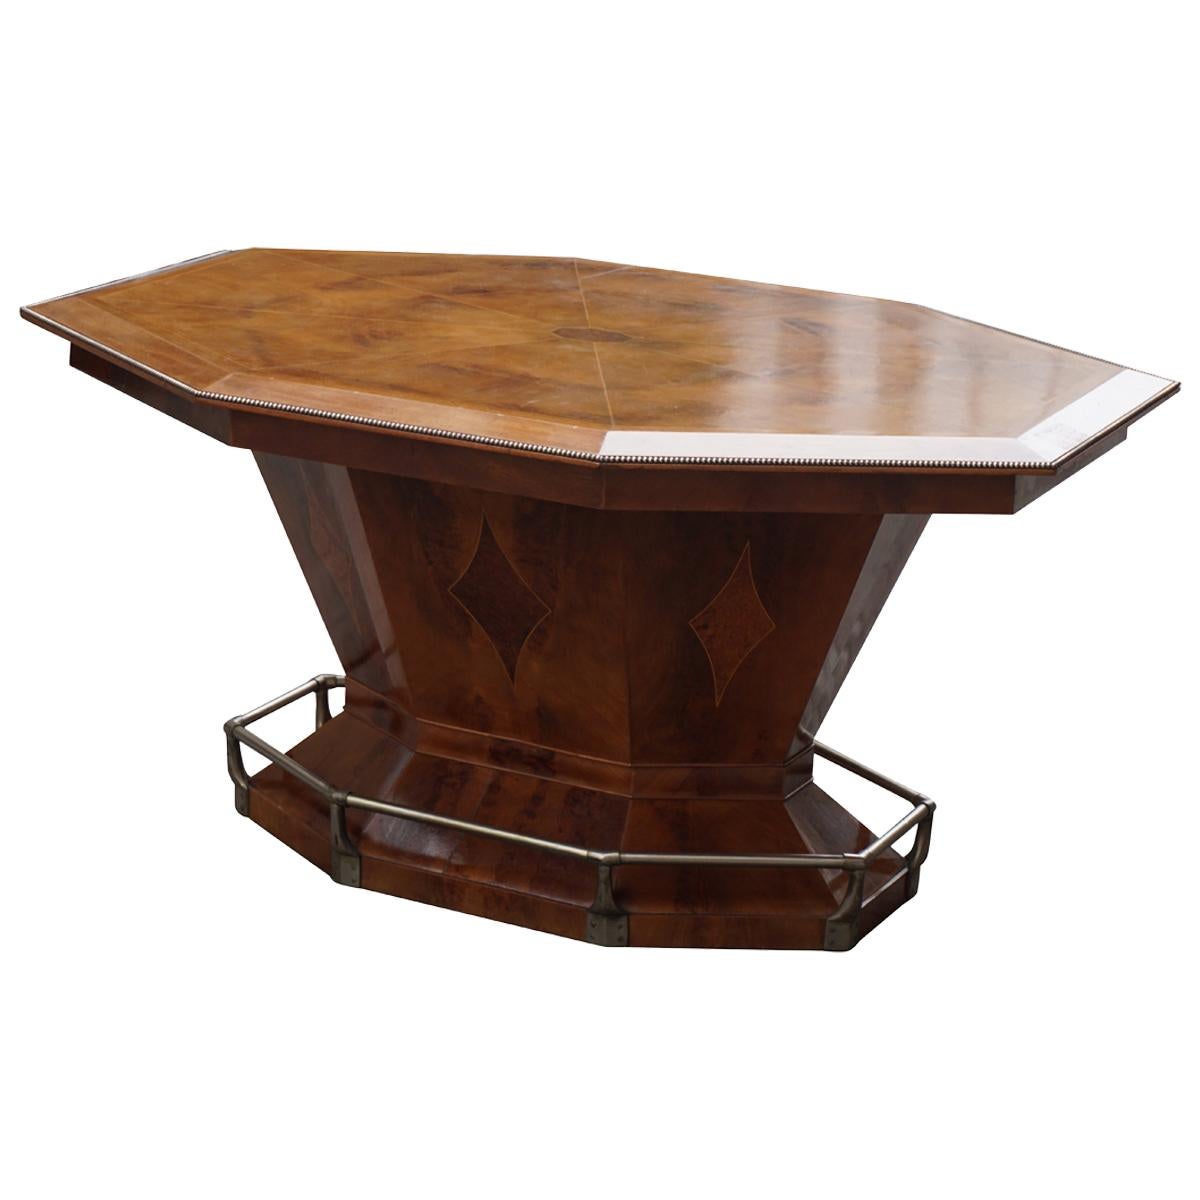 Rare Art Deco Dining or Conference Table in the Shape of an Octagonal Diamond